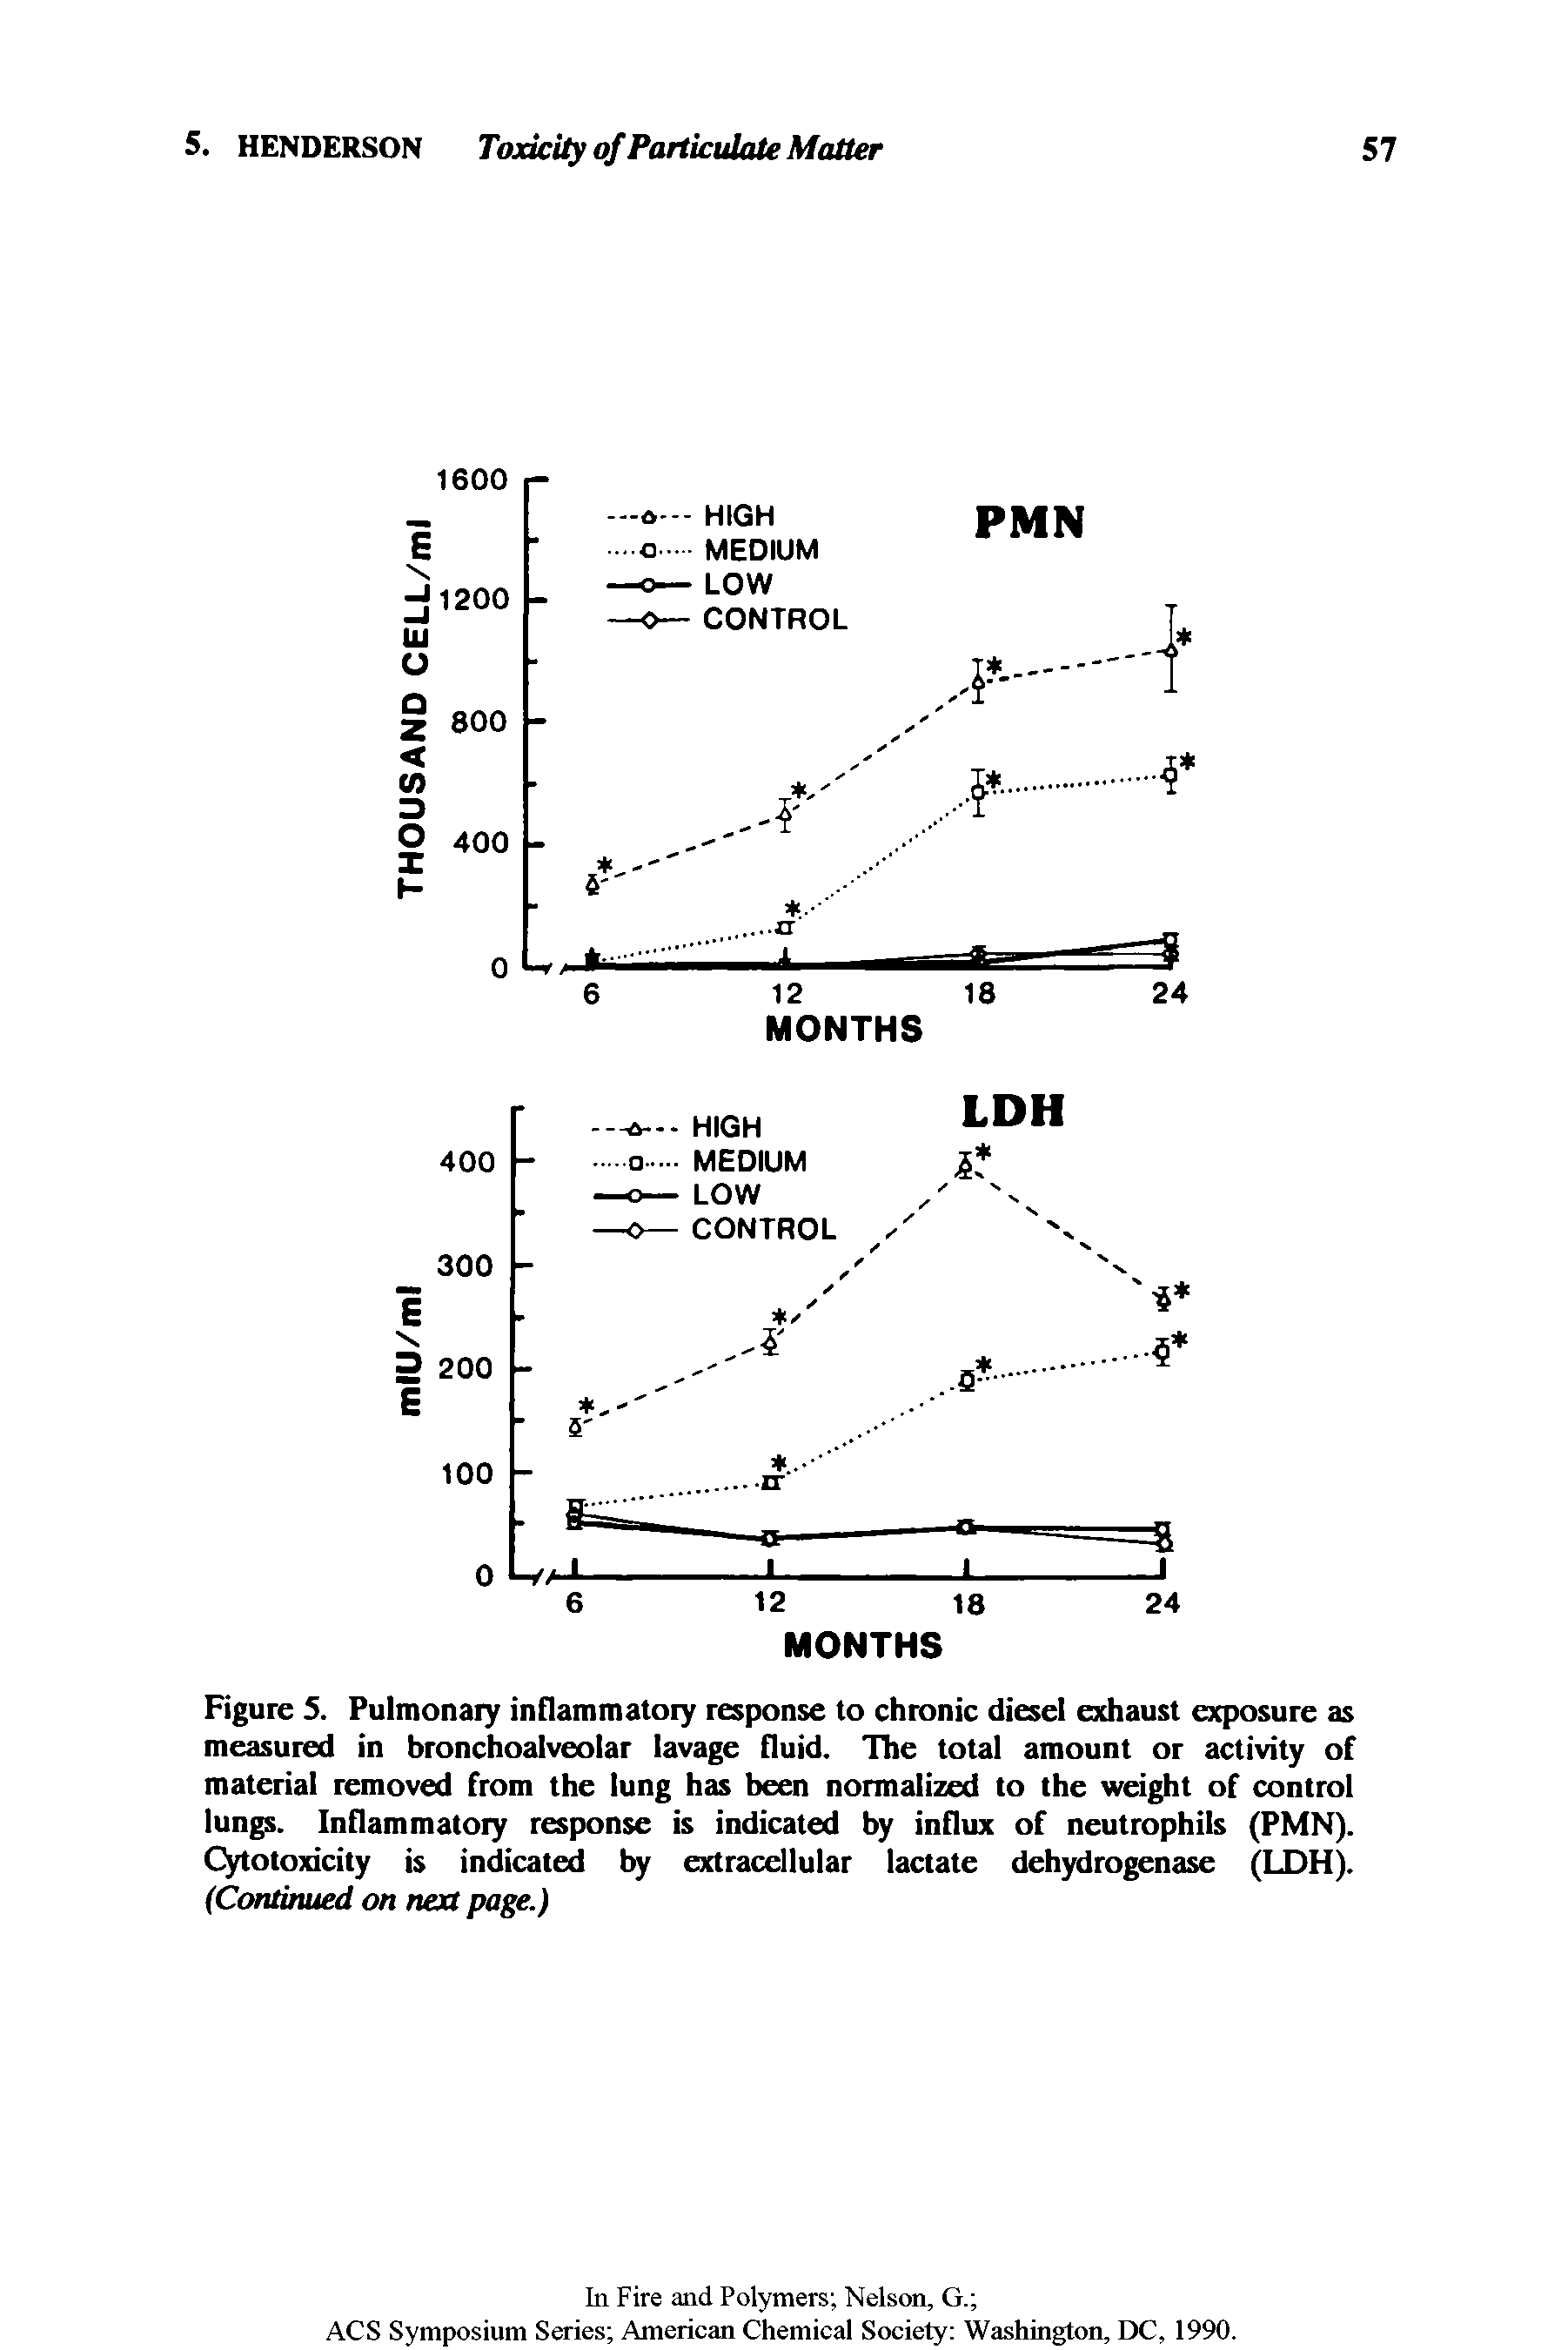 Figure 5. Pulmonary inflammatory response to chronic diesel exhaust exposure as measured in bronchoalveolar lavage fluid. The total amount or activity of material removed from the lung has been normalized to the weight of control lungs. Inflammatory response is indicated by influx of neutrophils (PMN). Cytotoxicity is indicated by extracellular lactate dehydrogenase (LDH). (Continued on next page.)...